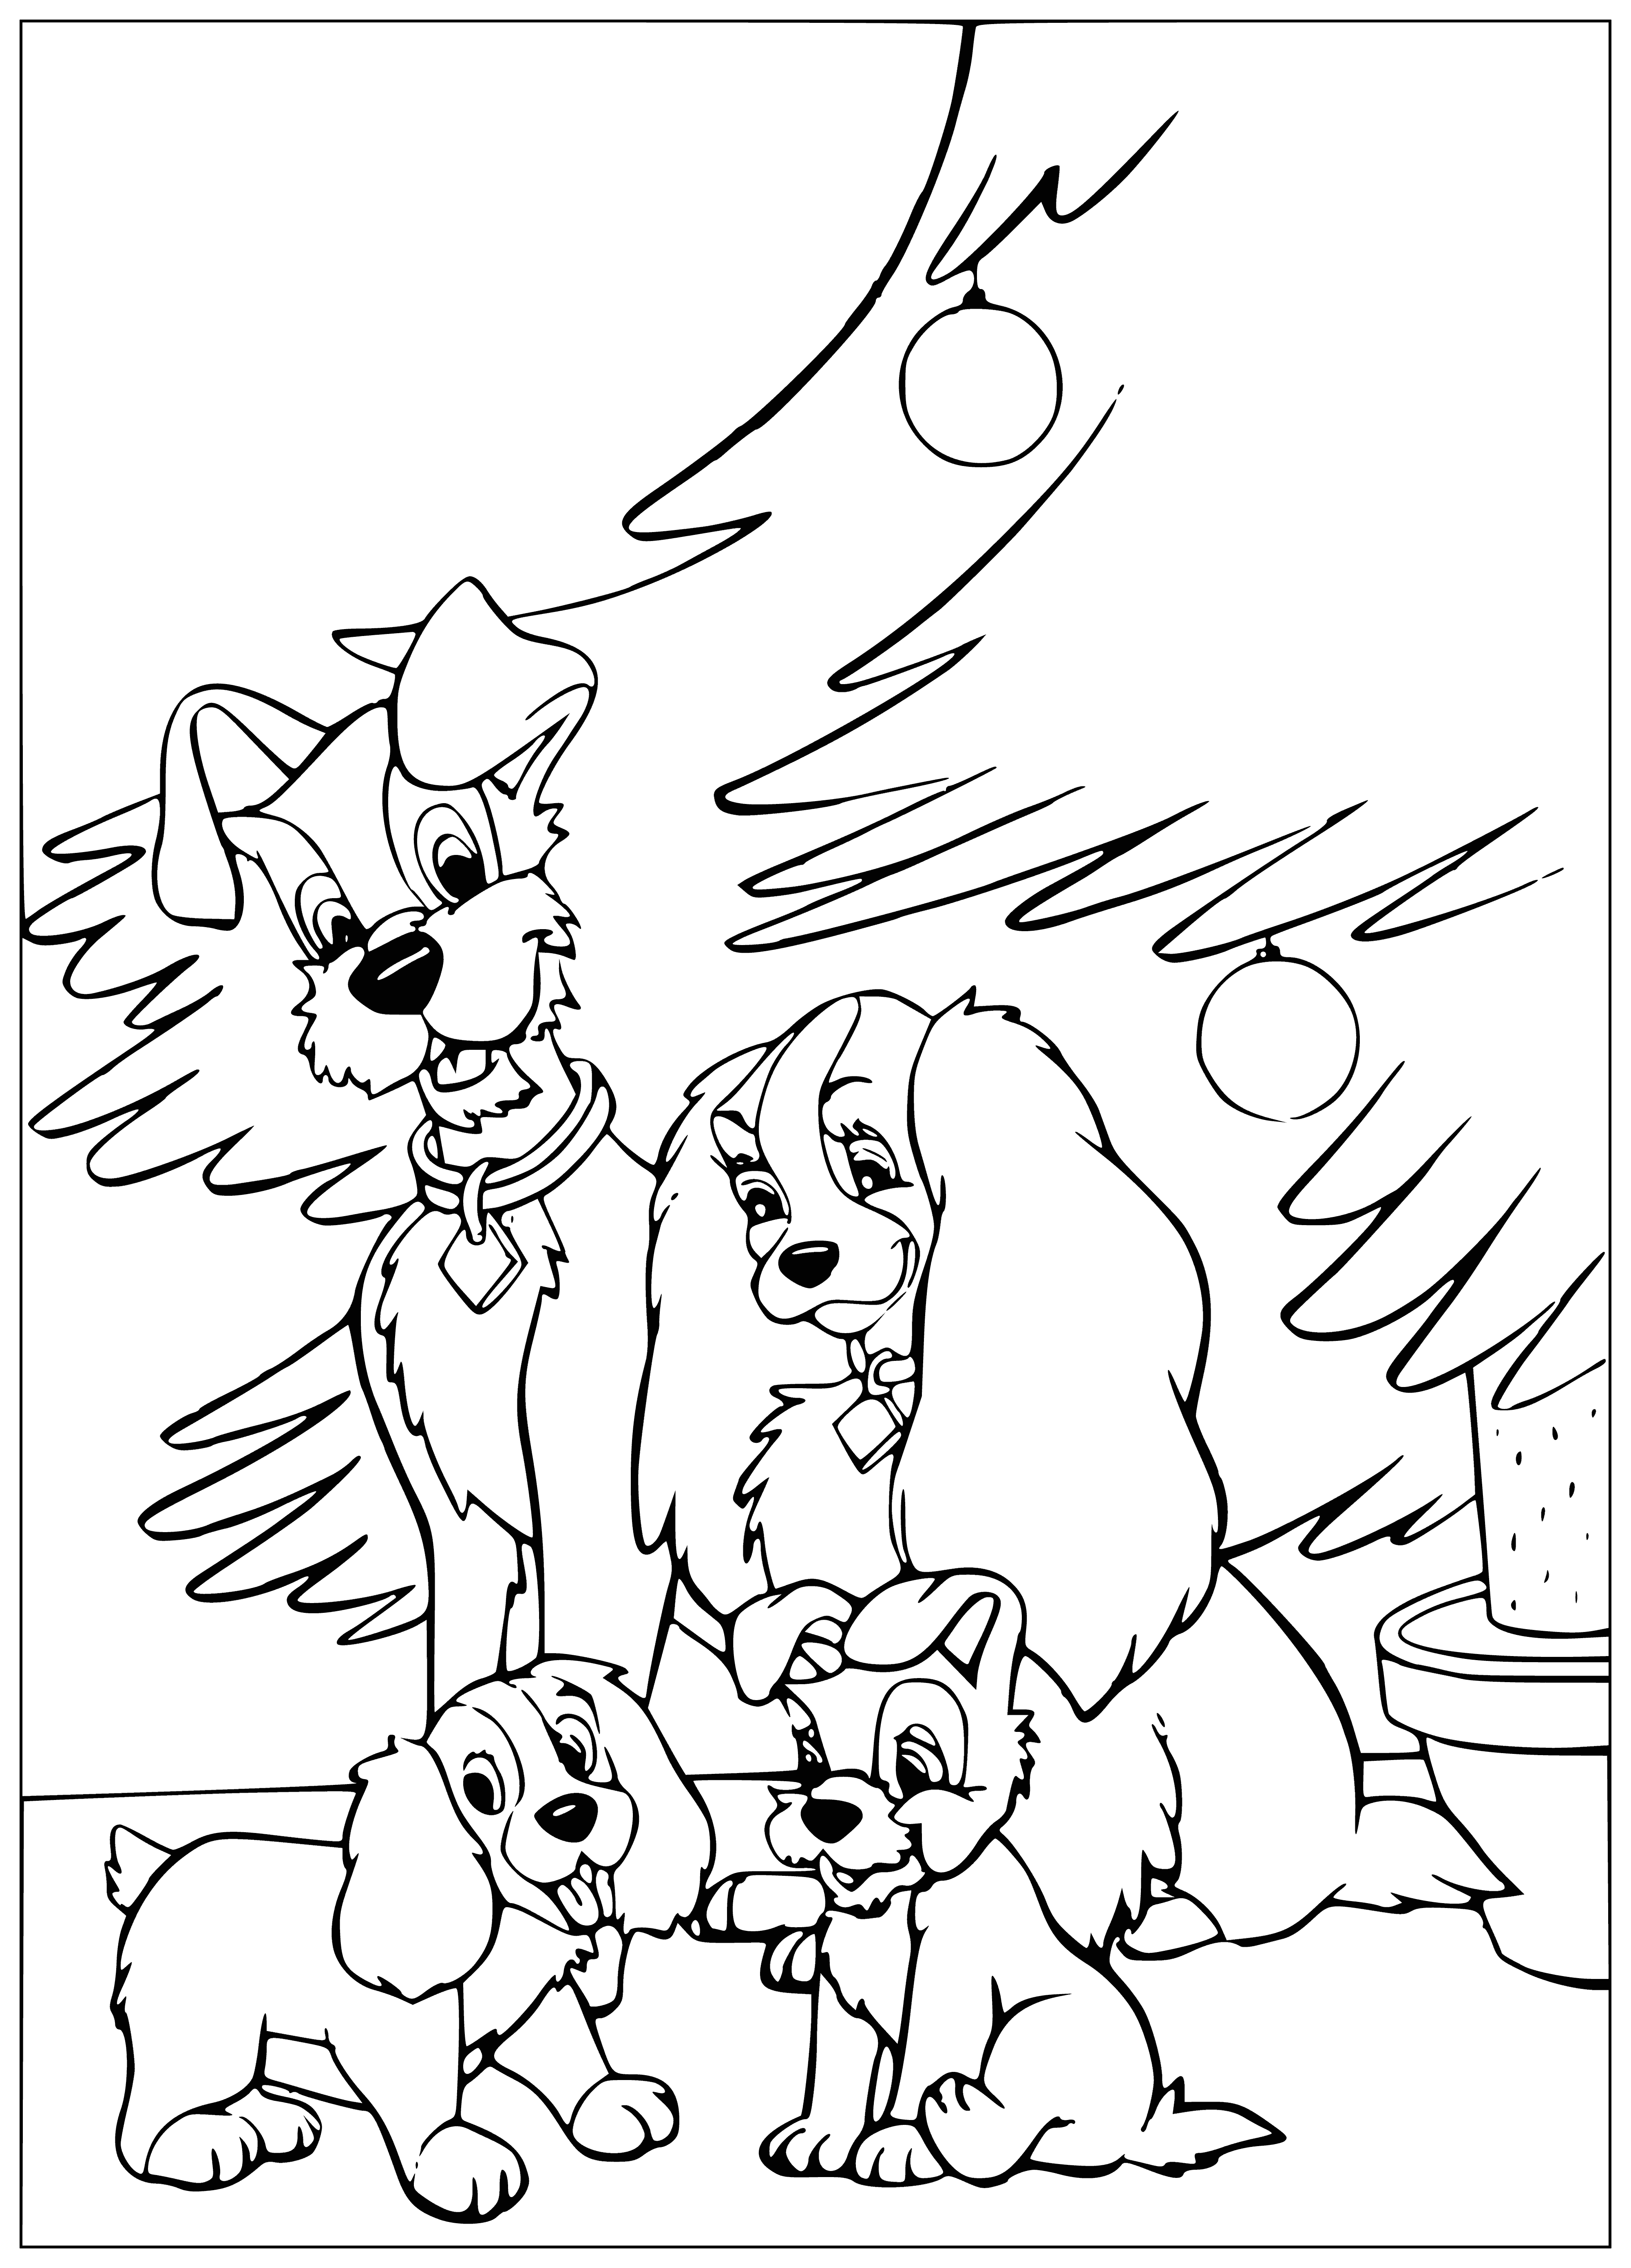 coloring page: Puppies play, wrestle & bite tails; their mother watches over them - two brown & one black.